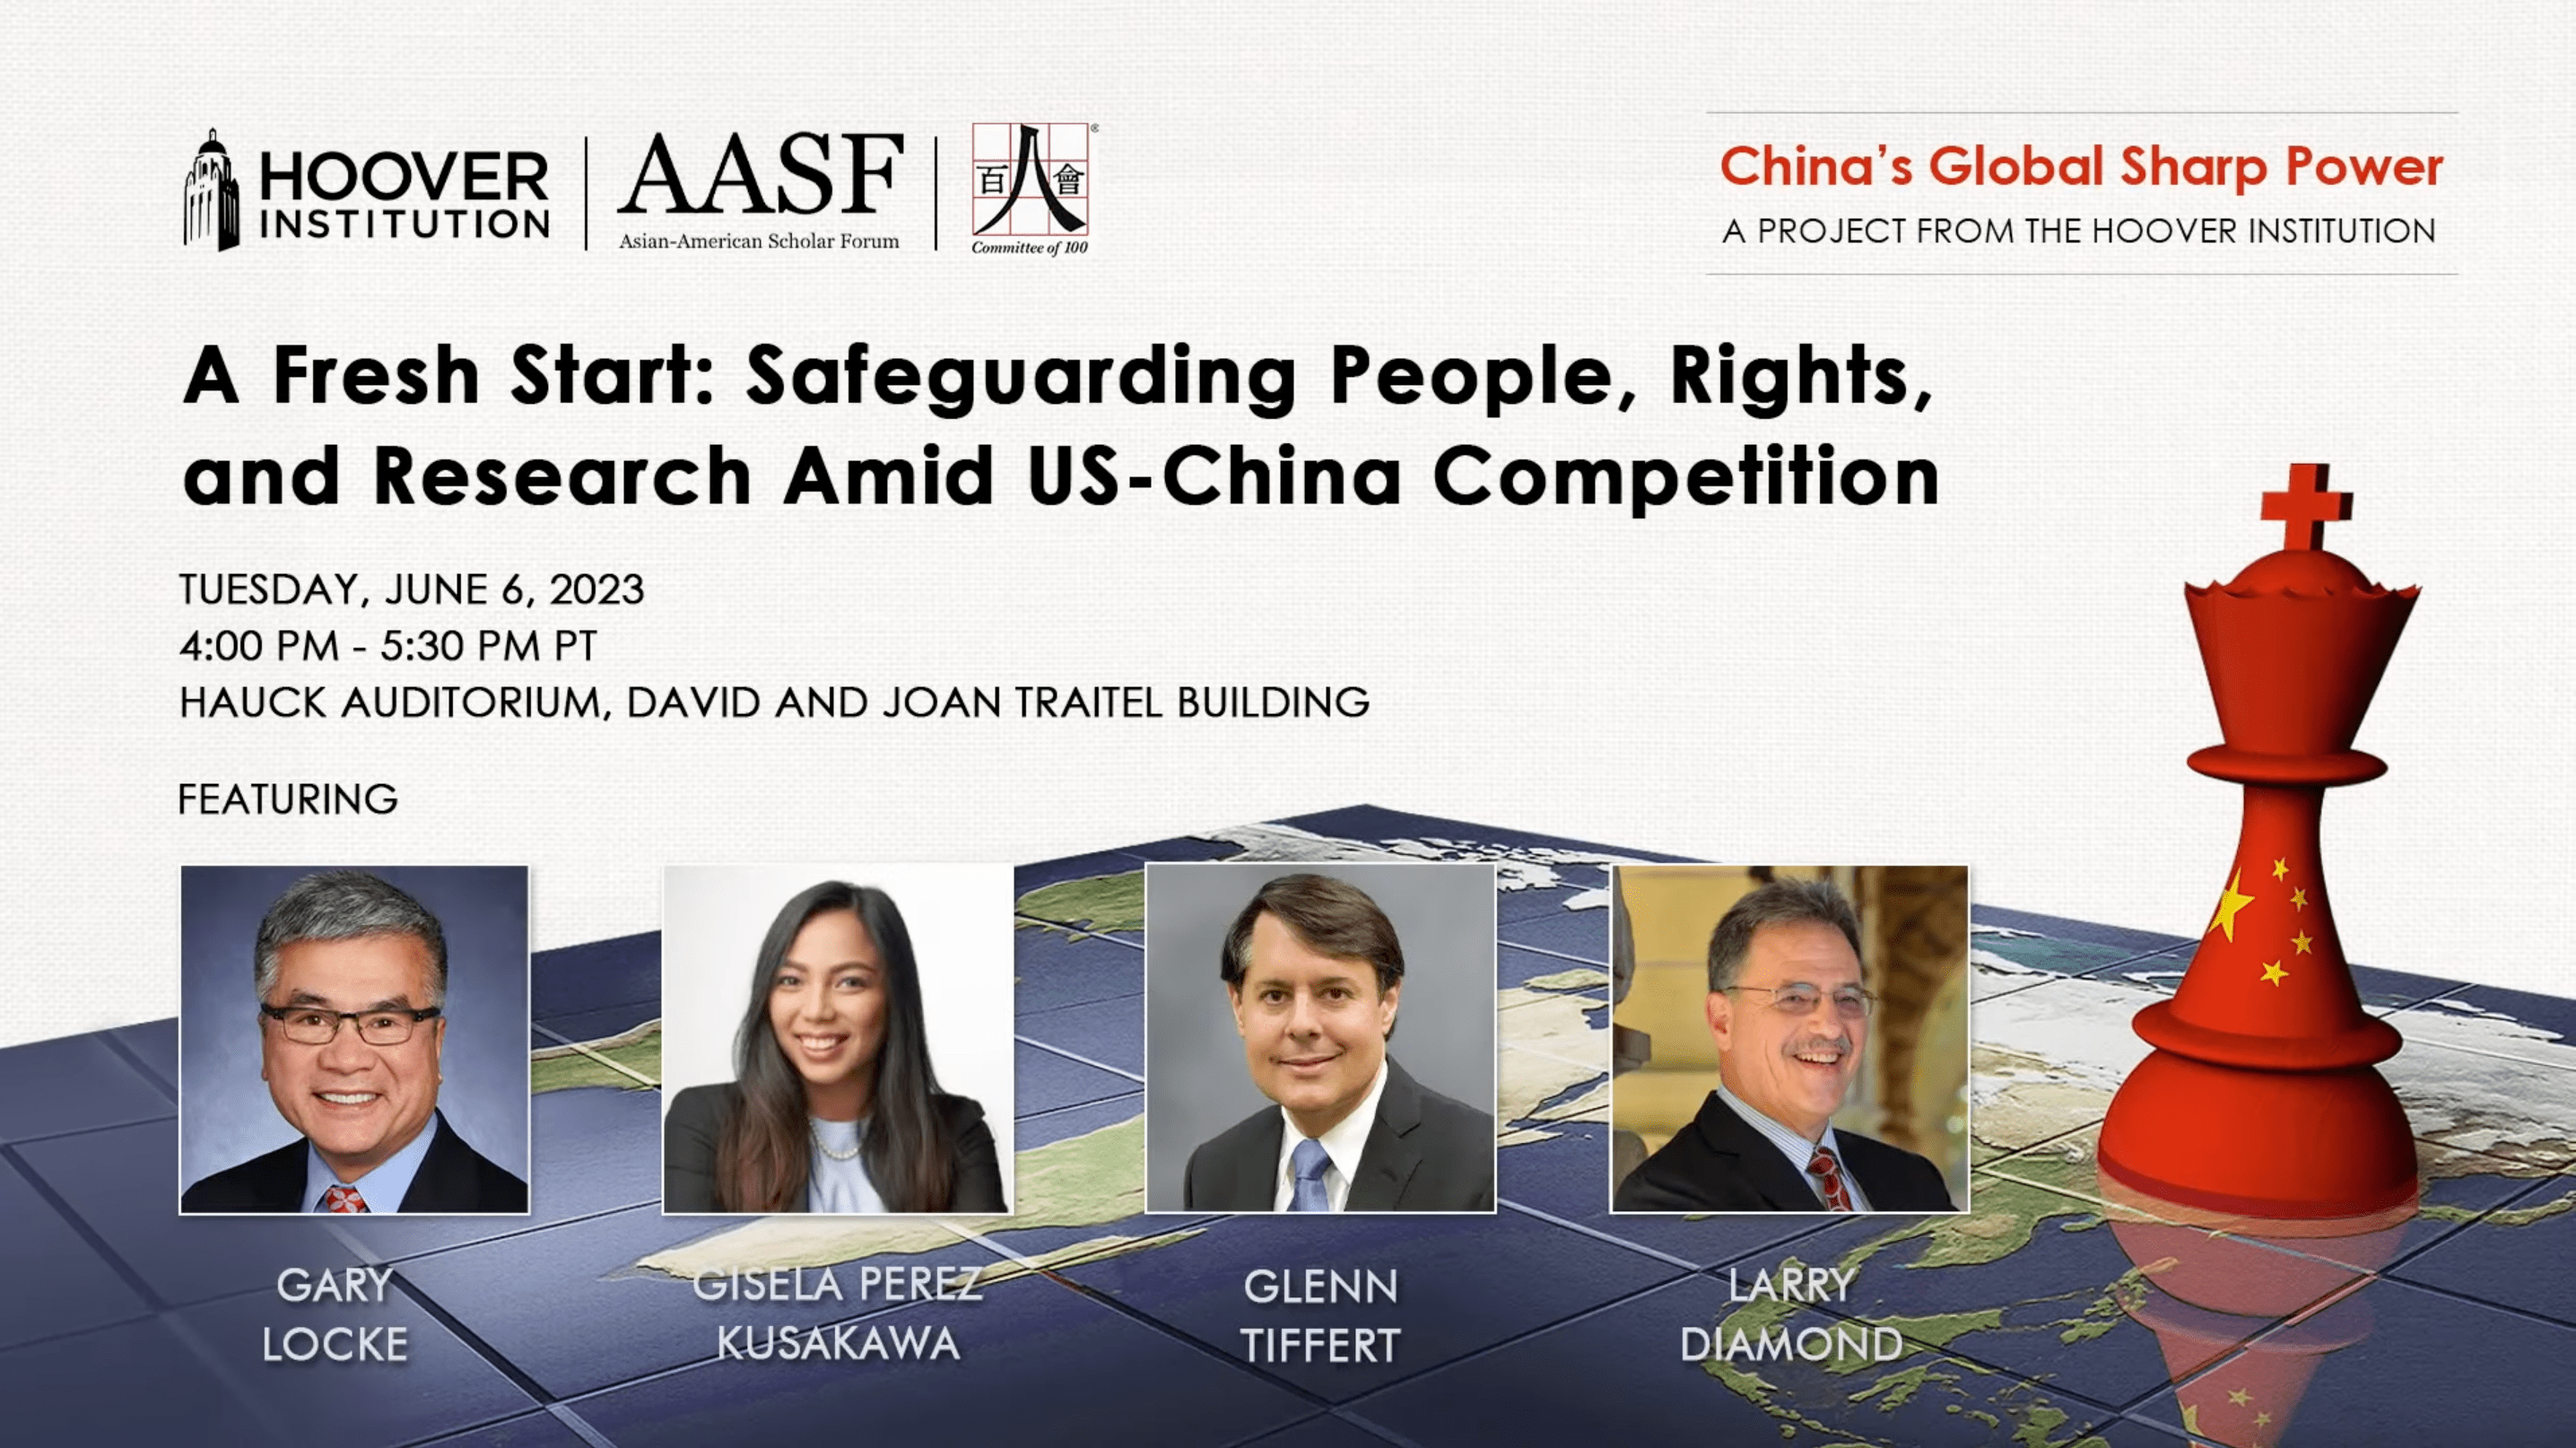 A Fresh Start: Safeguarding People, Rights, and Research Amid US-China Competition